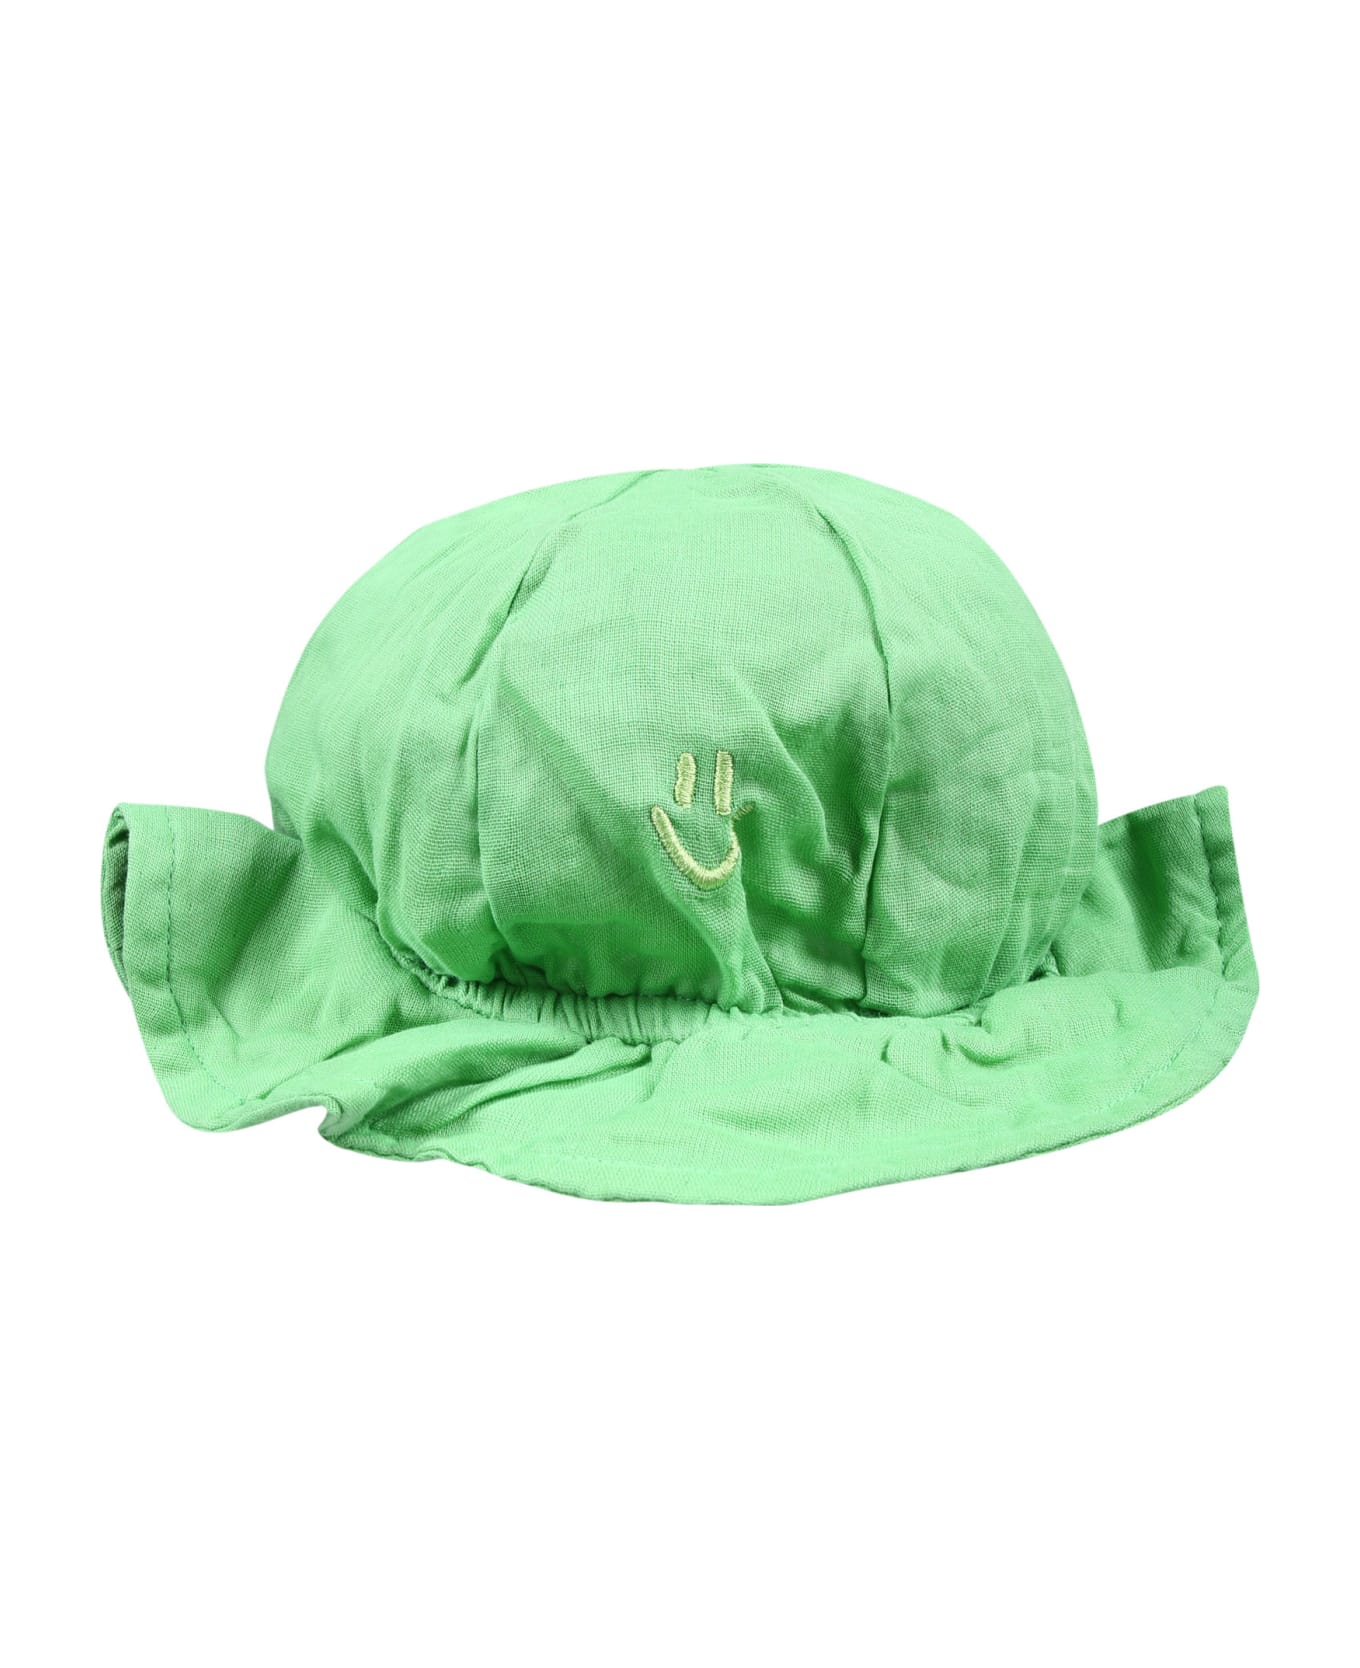 Molo Green Cloche For Kids With Smile - Green アクセサリー＆ギフト